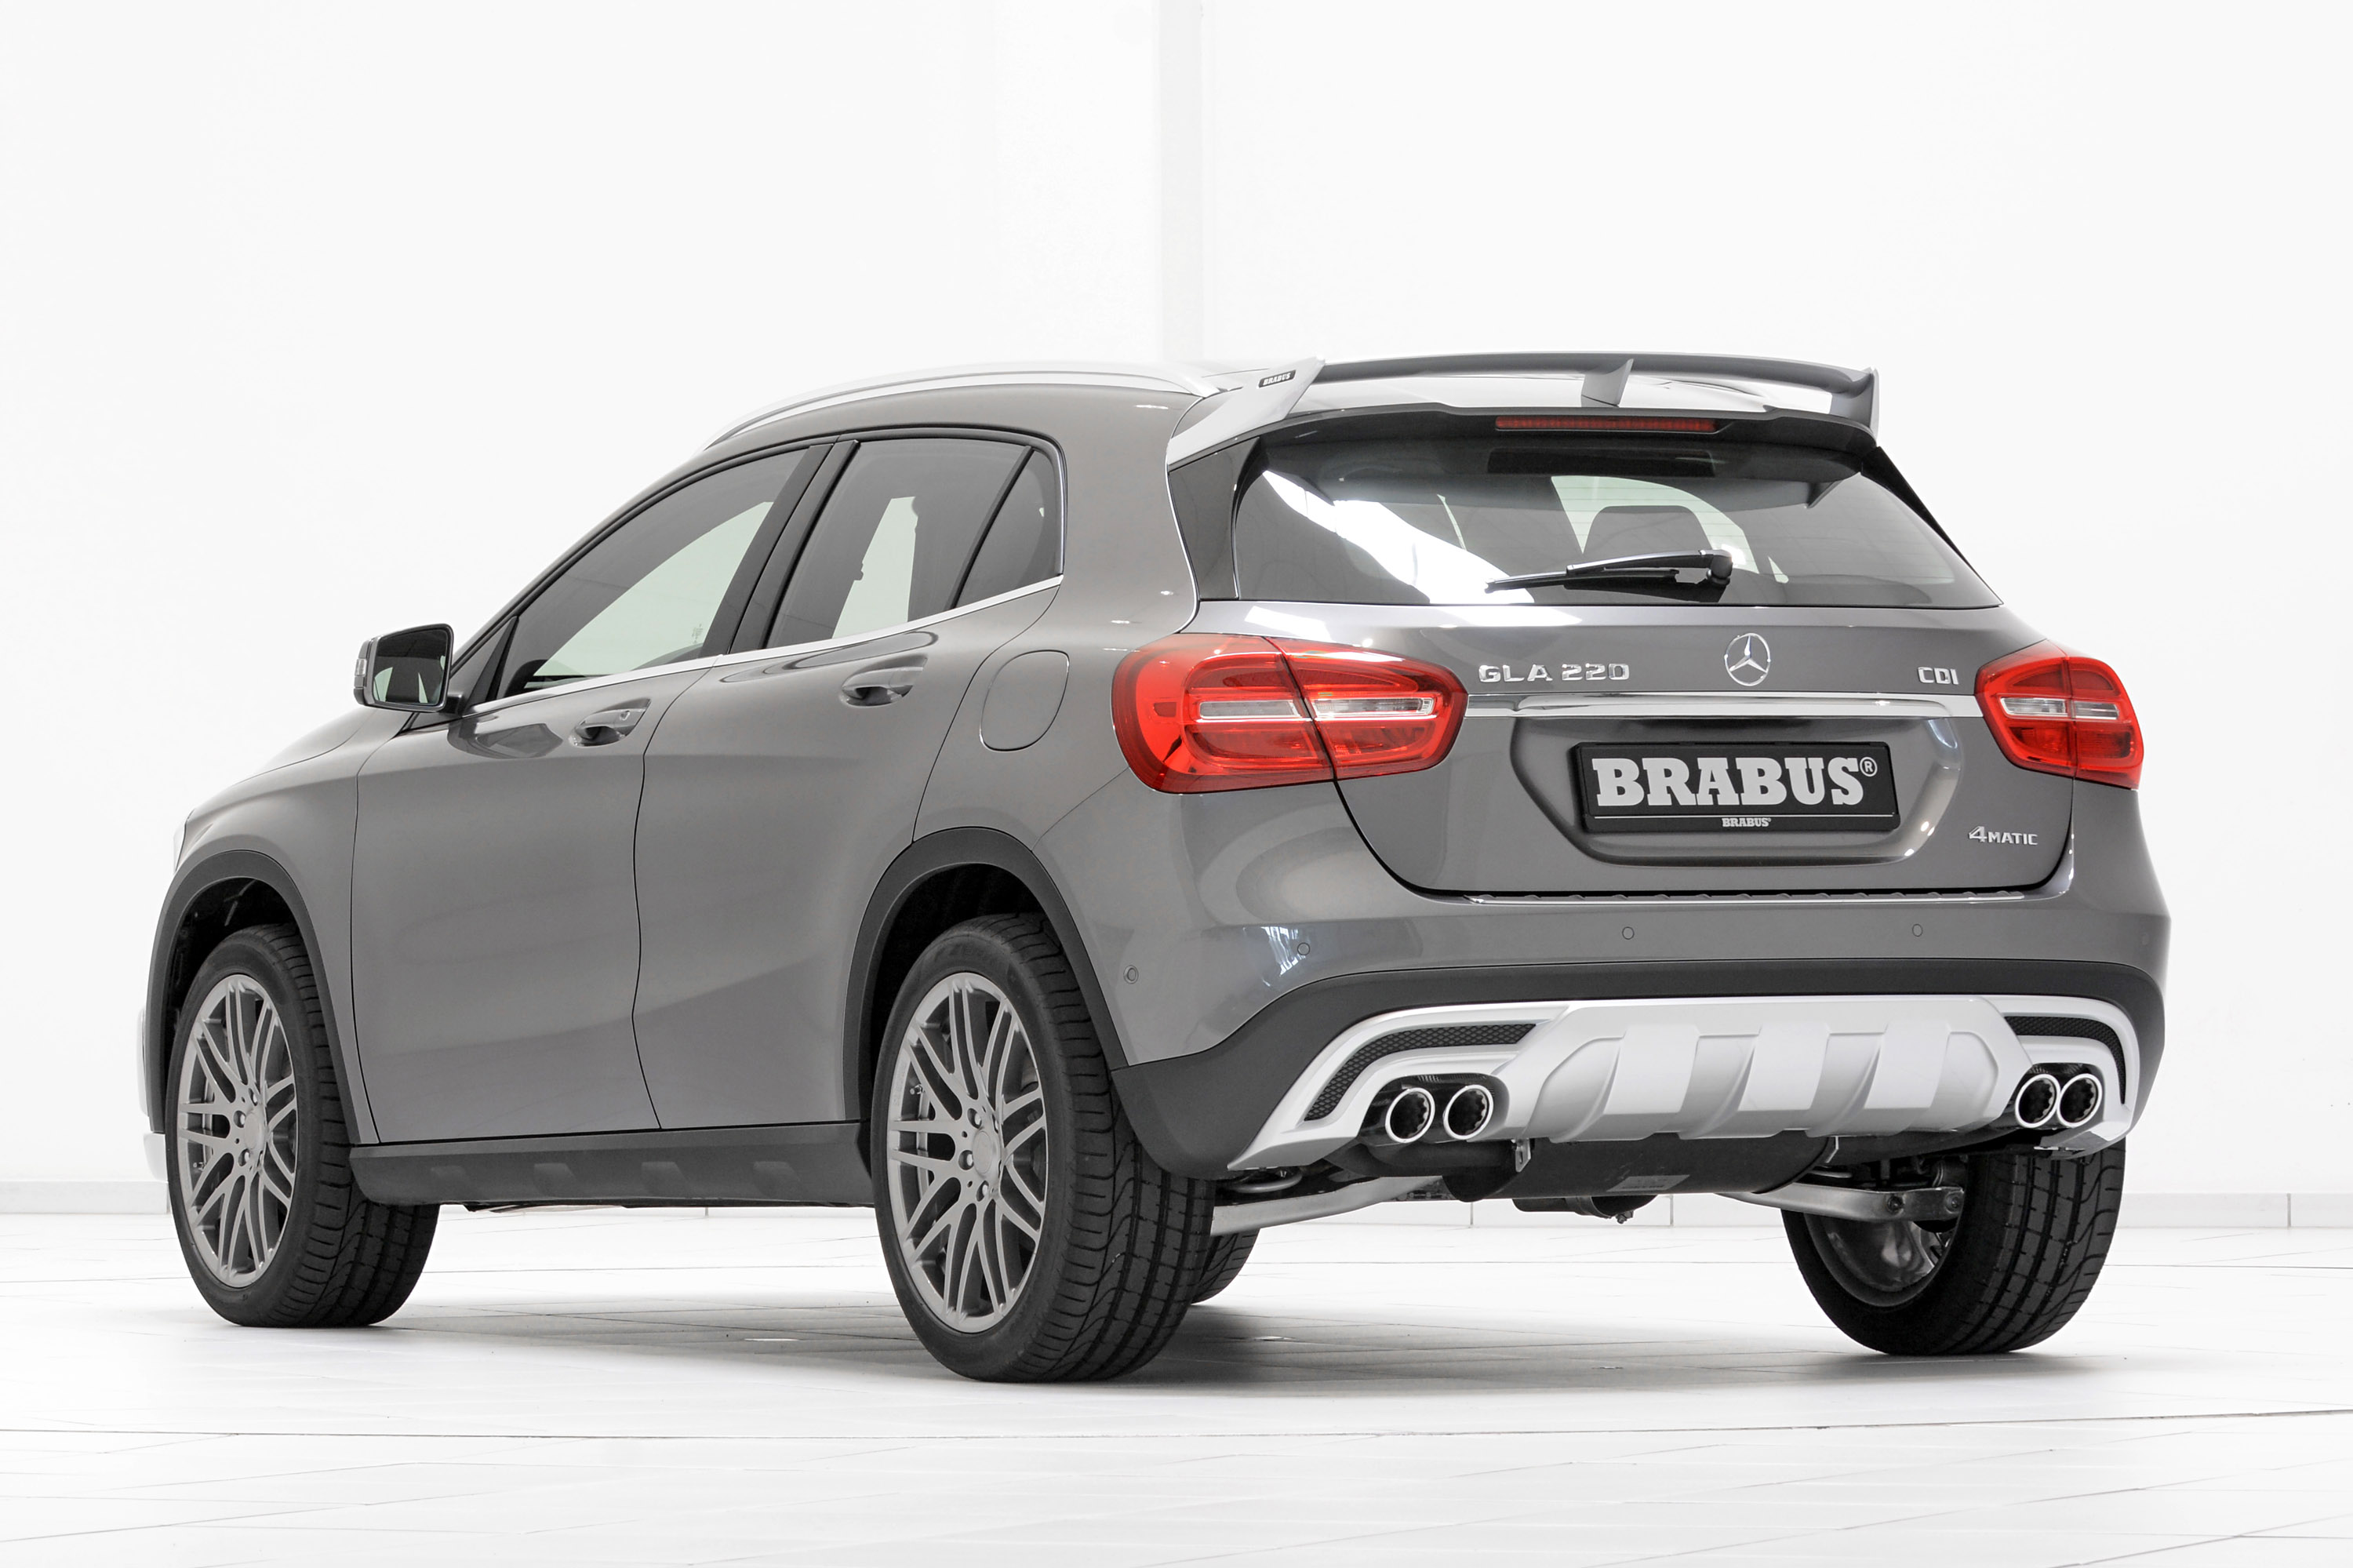 2014 Brabus Mercedes-Benz GLA-Class - HD Pictures ...